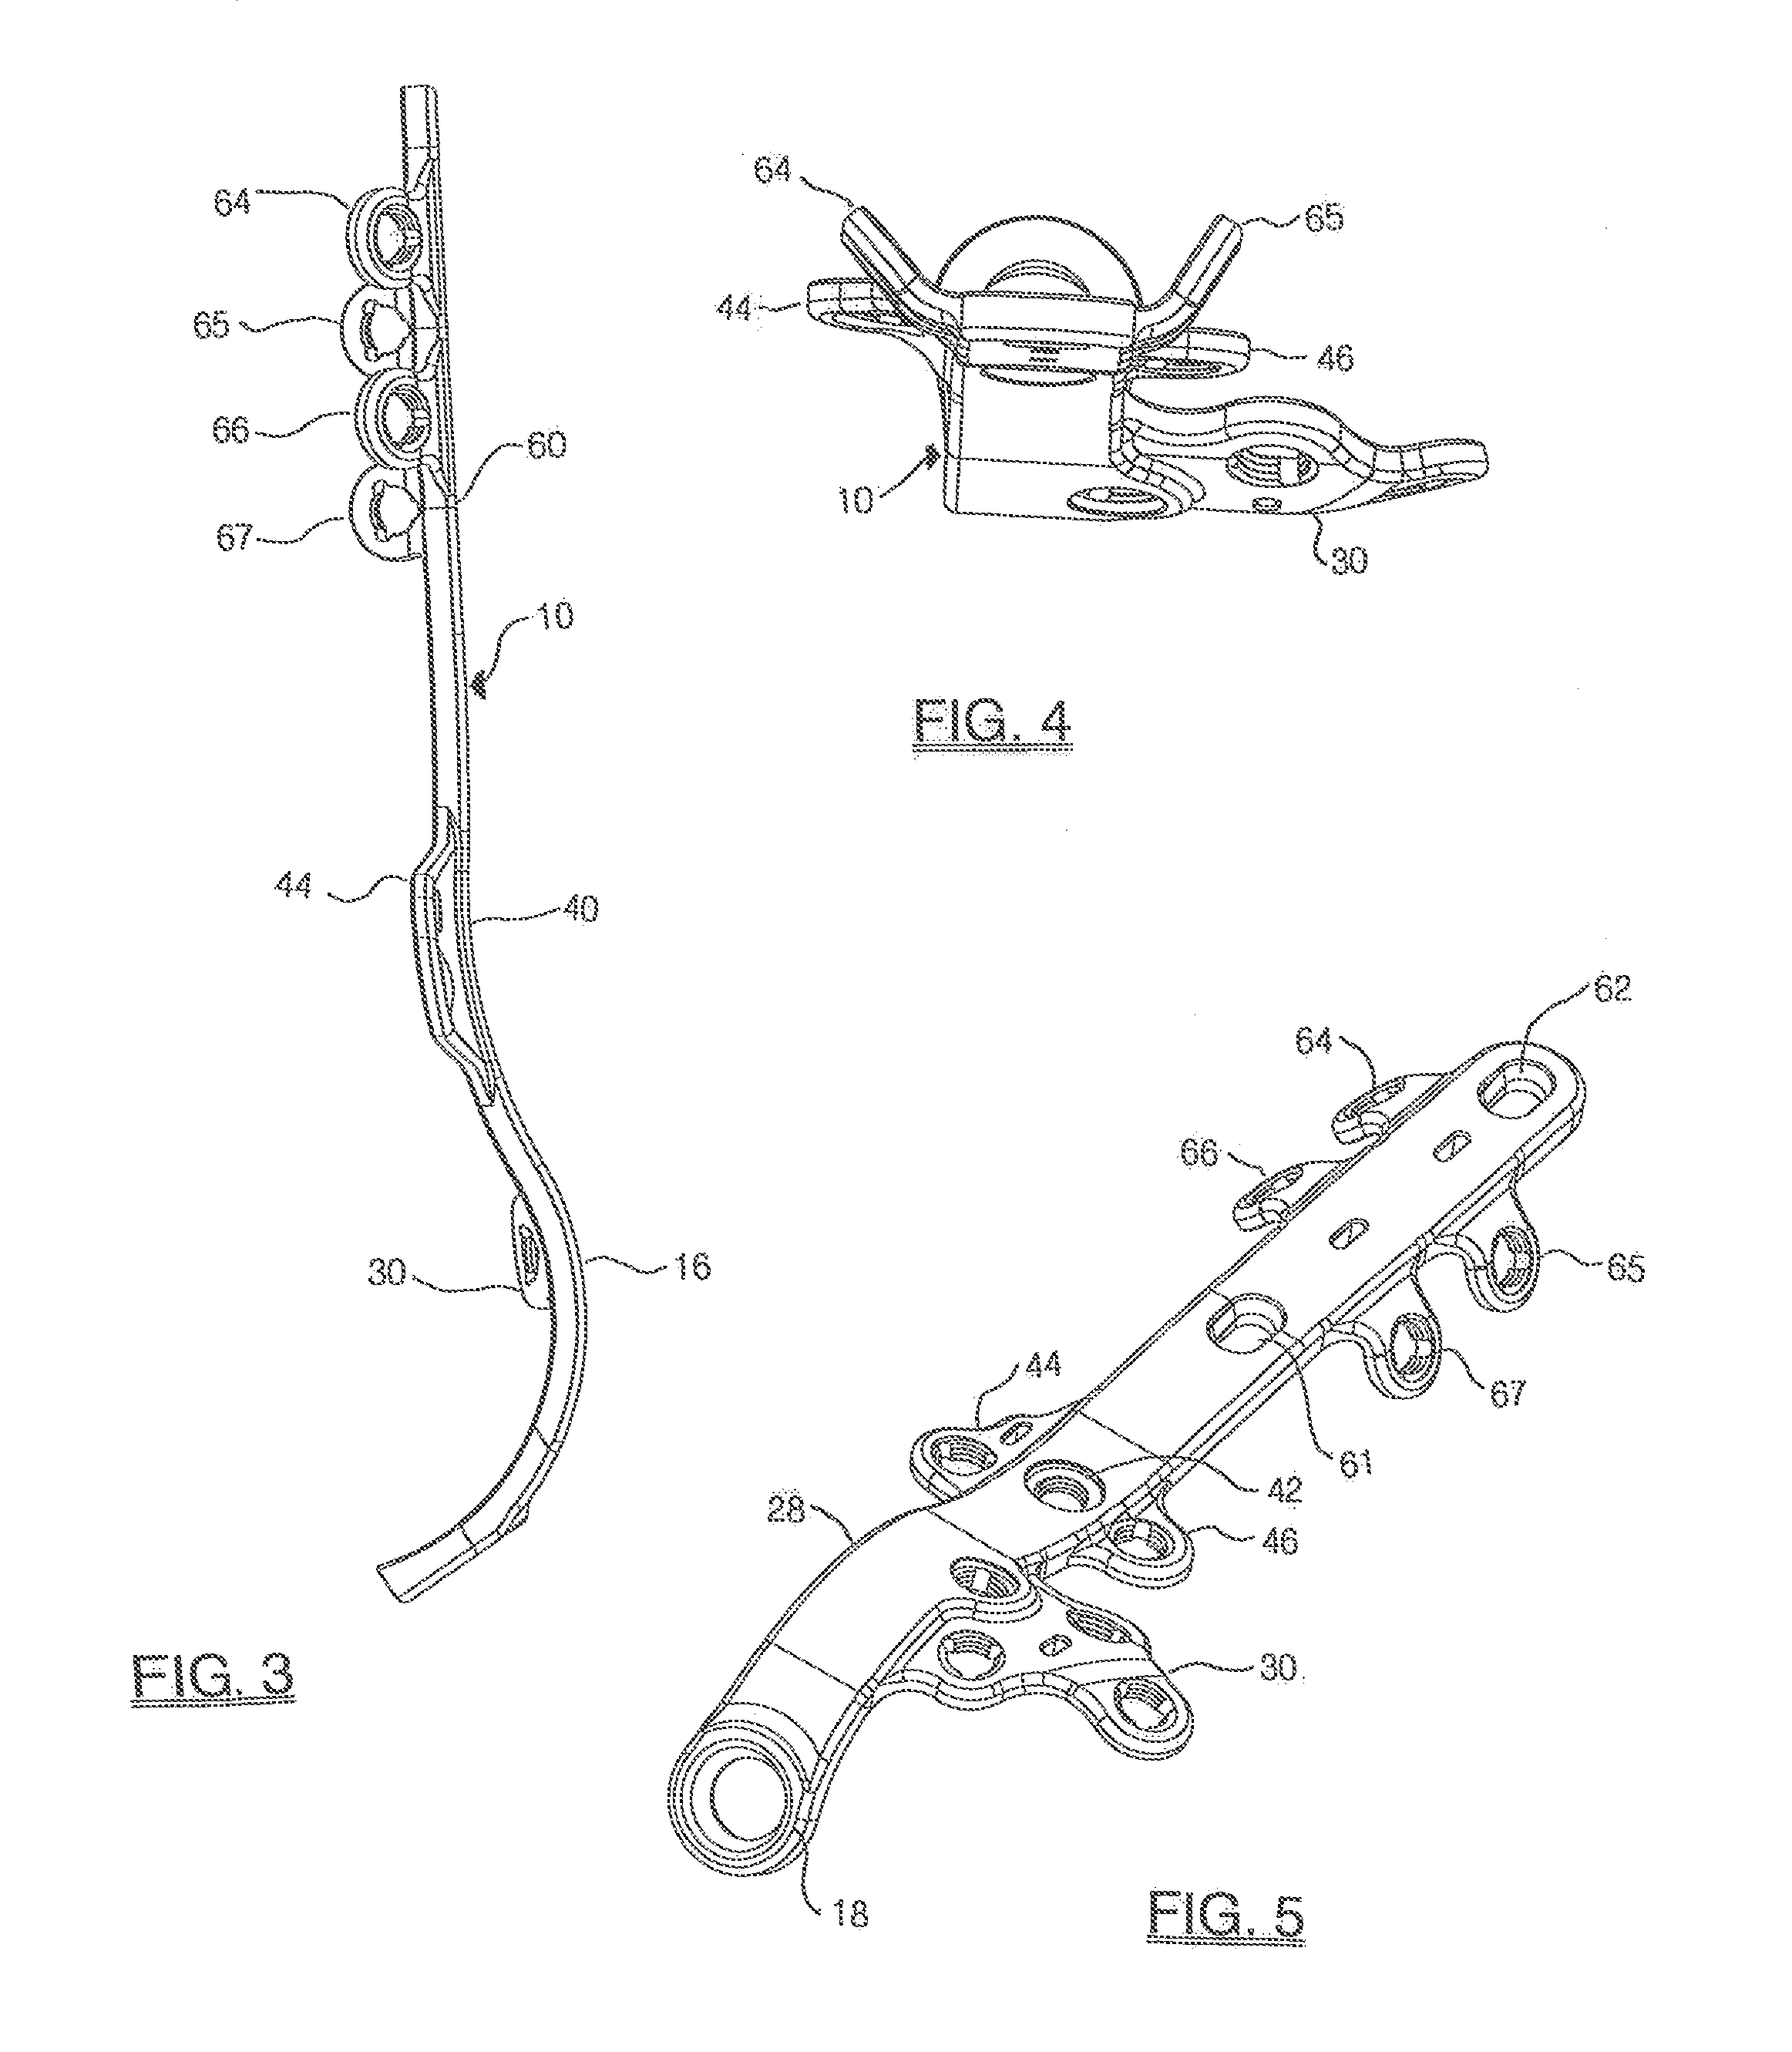 Lateral ankle fusion plate system and jig, and method for use therewith